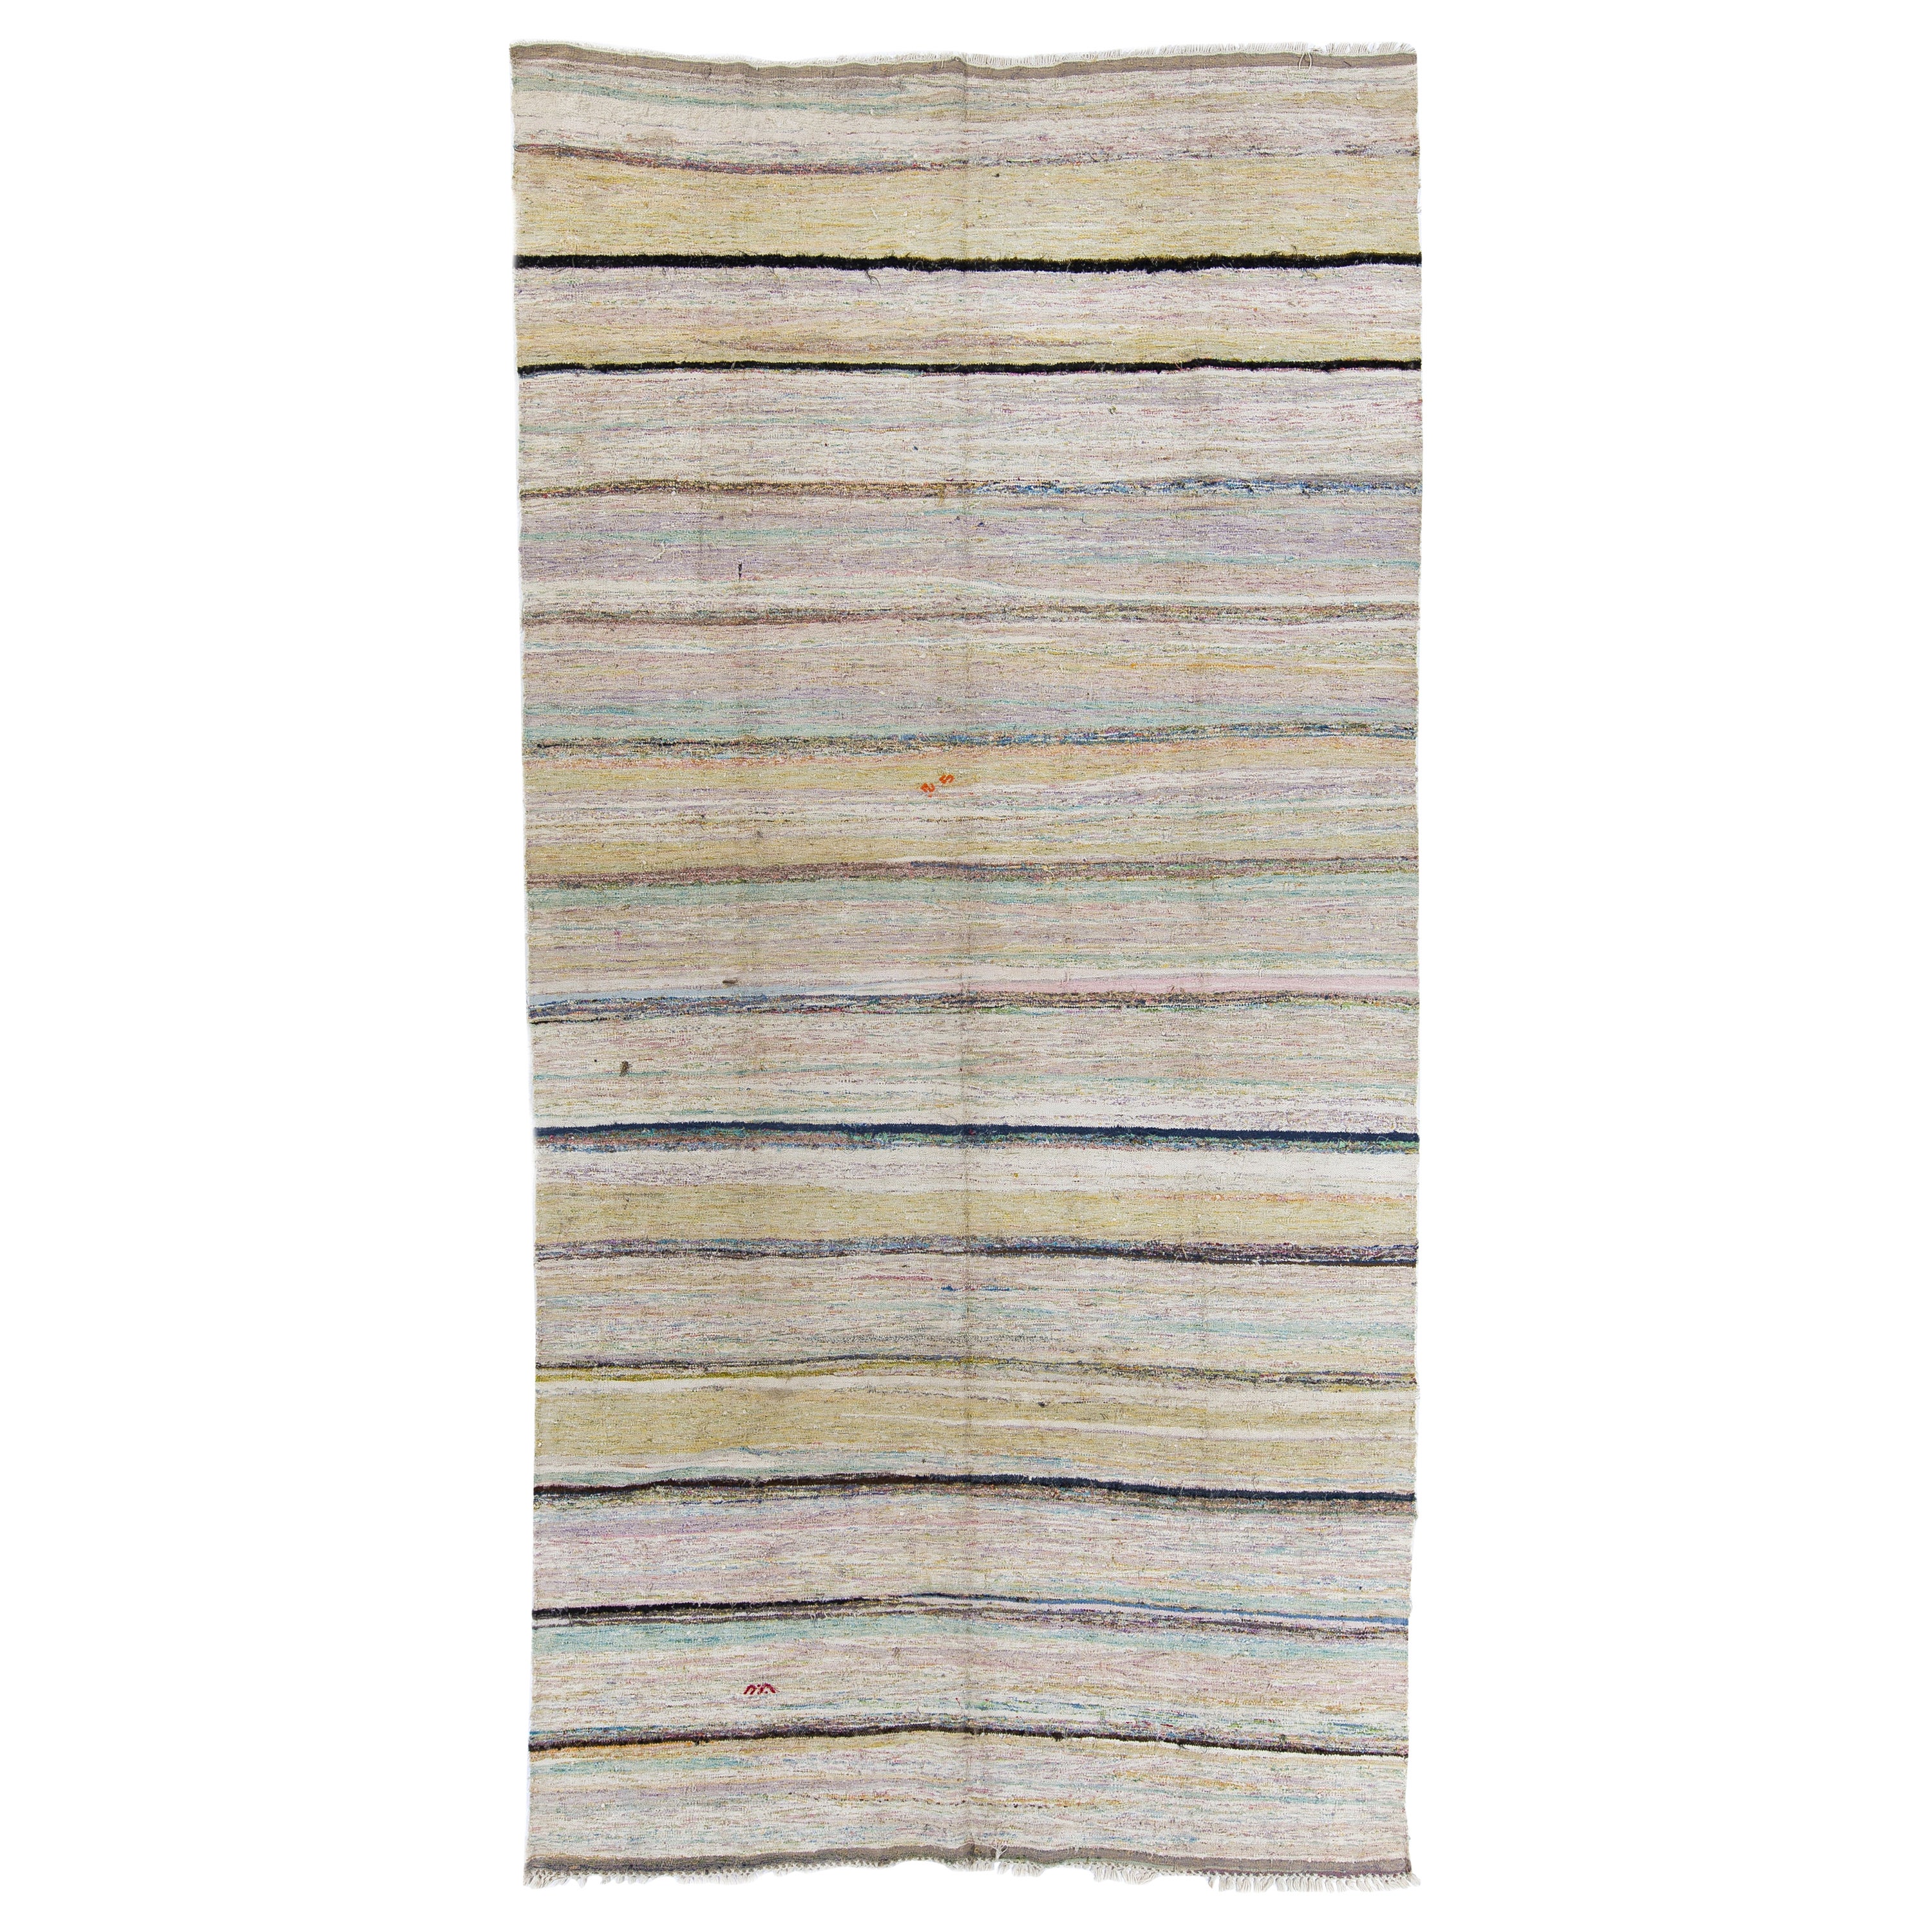 6.5x12.8 Ft Cotton Hand-Woven Striped Kilim Rug in Pastel Colors, Reversible For Sale